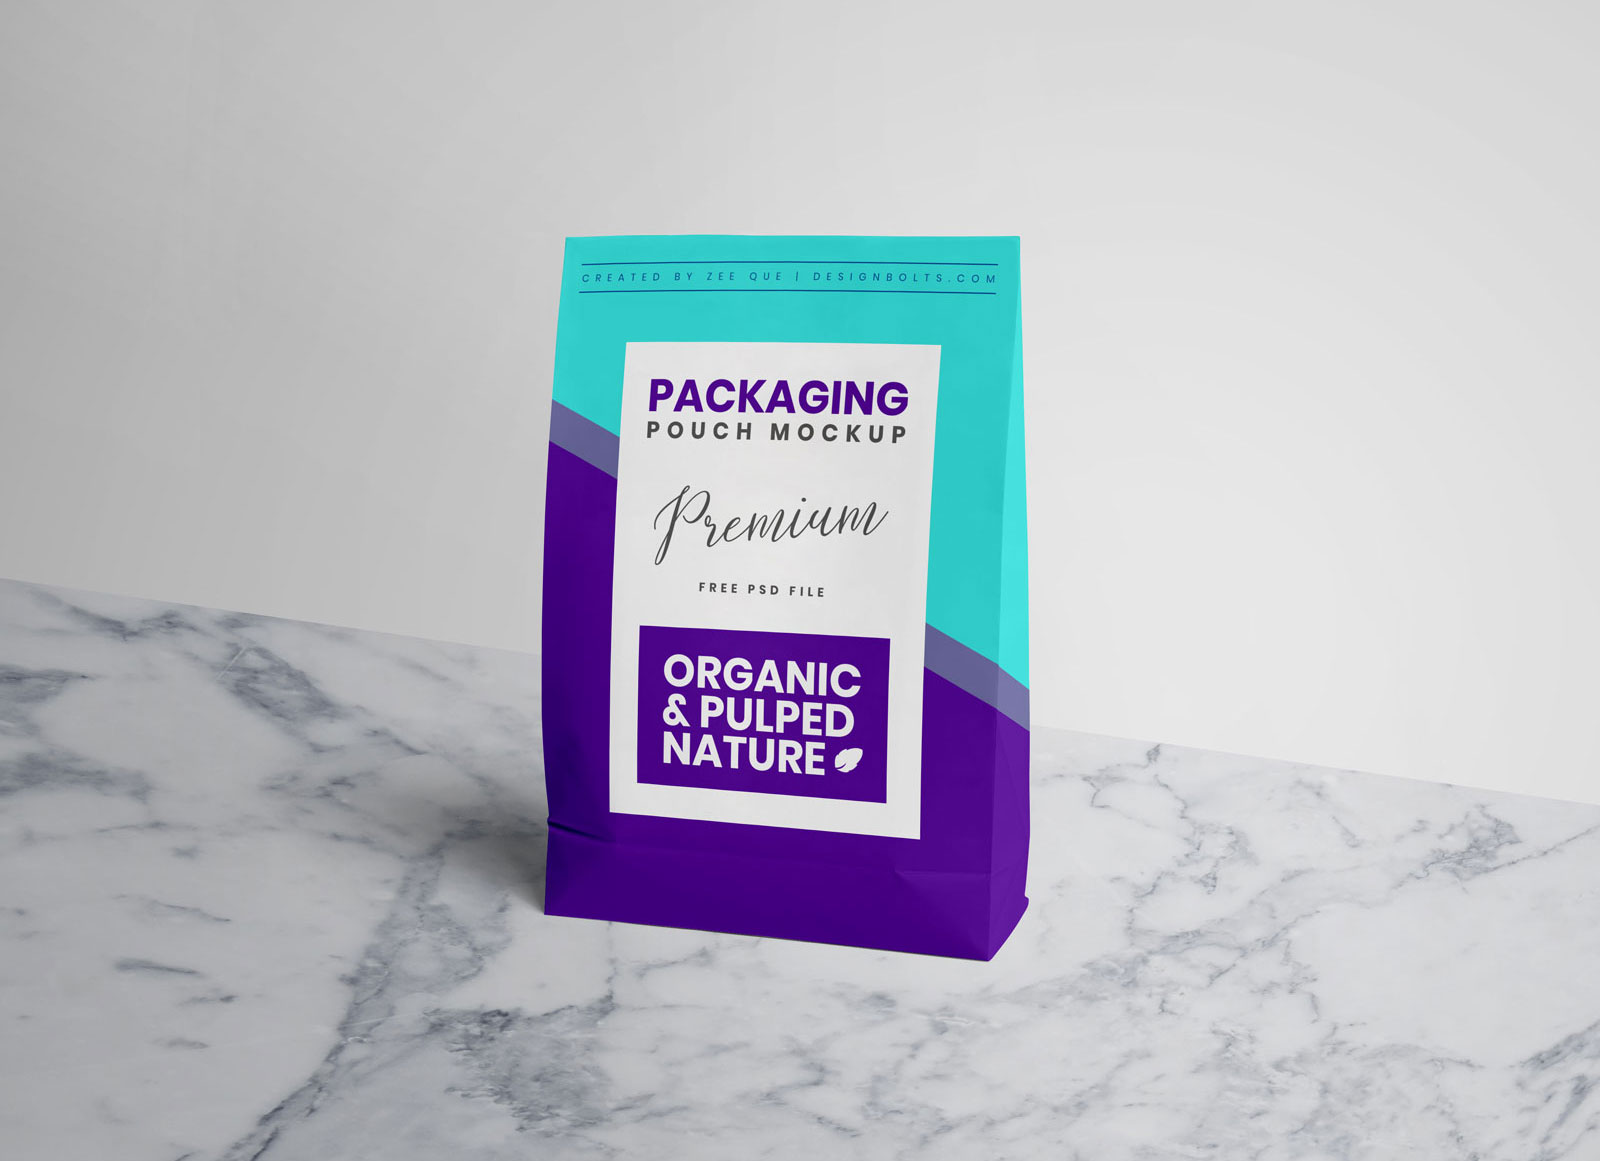 Download Free Paper Pouch Packaging Mockup PSD - Good Mockups Free Mockups